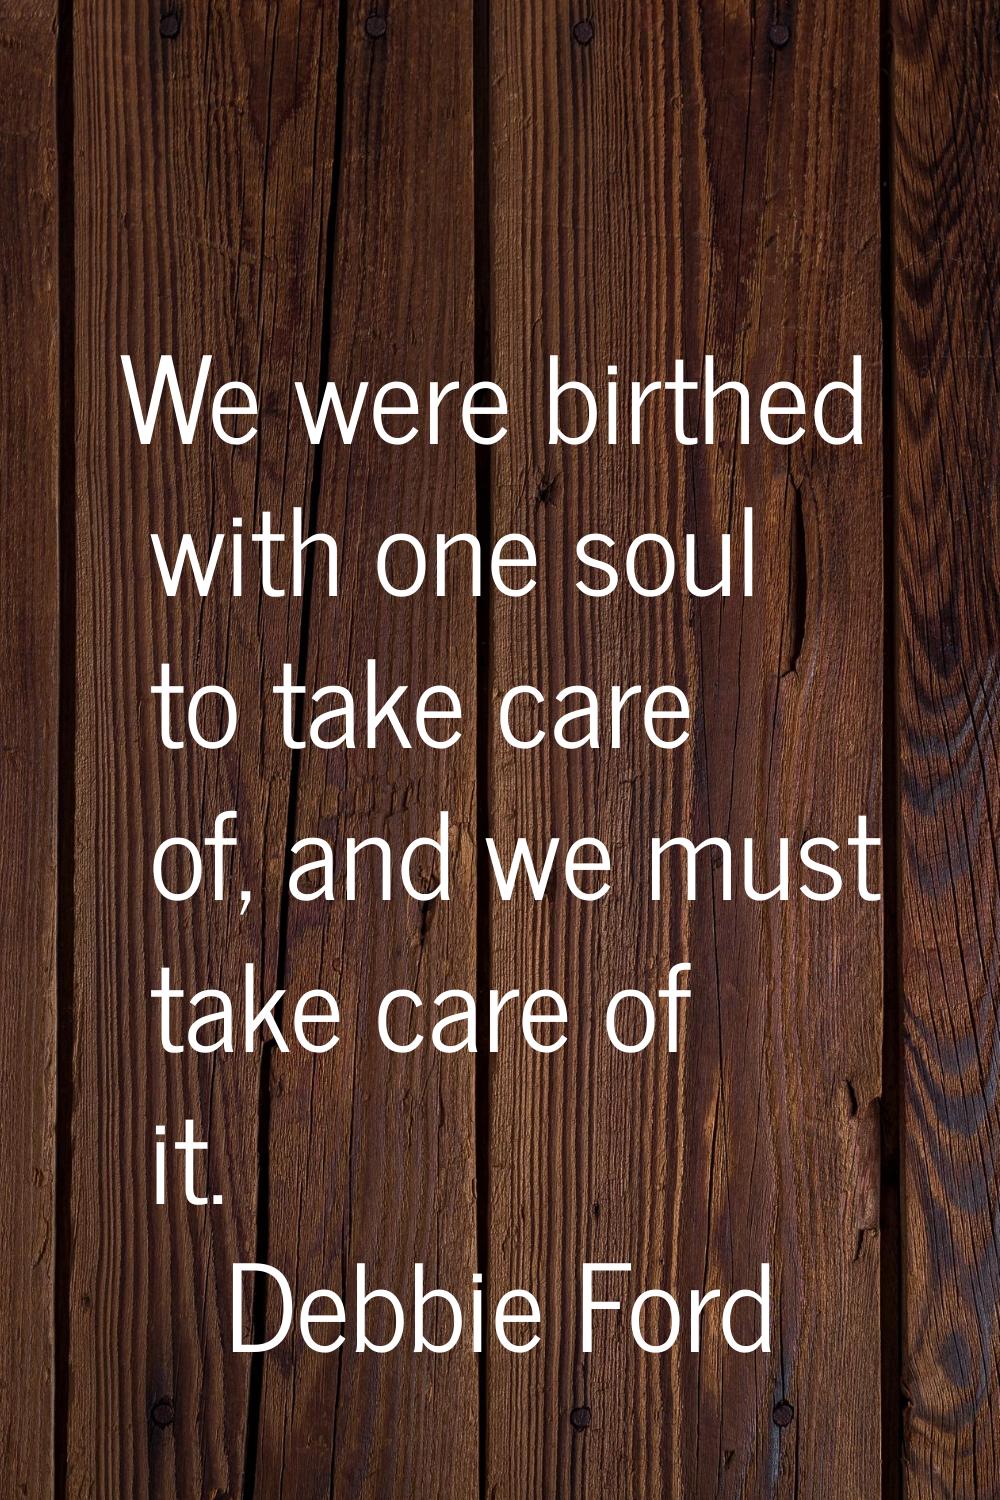 We were birthed with one soul to take care of, and we must take care of it.